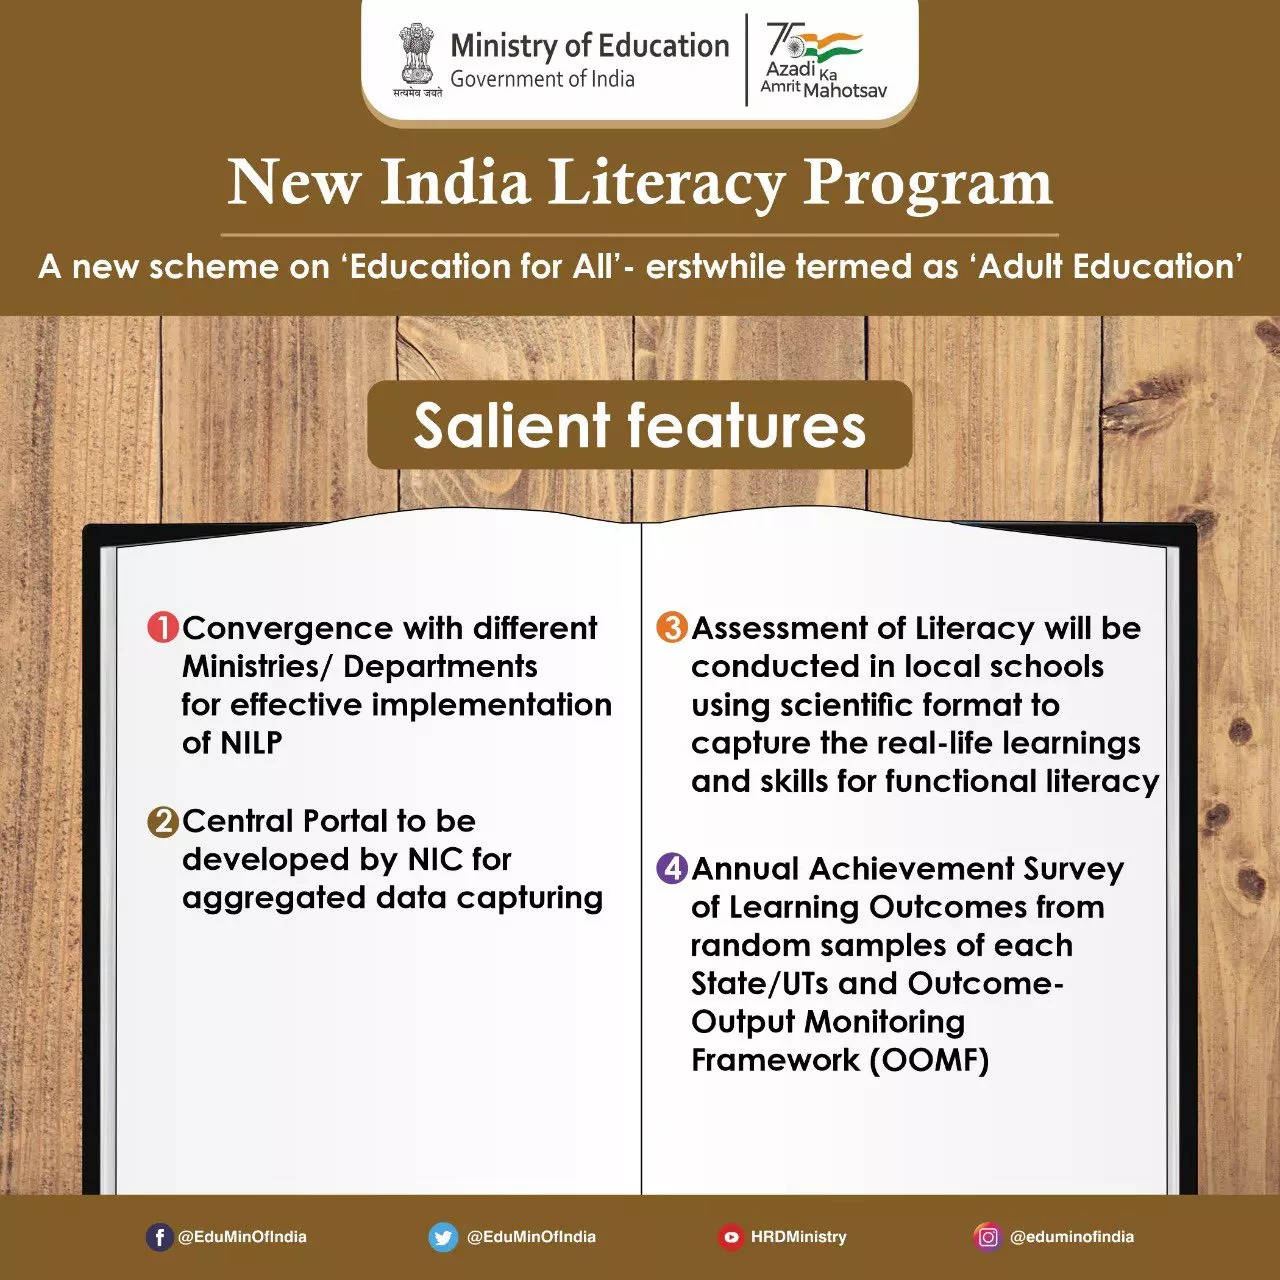 New India Literacy Programme launched to cover target of 5 crore non-literates in age group of 15 years and above_70.1